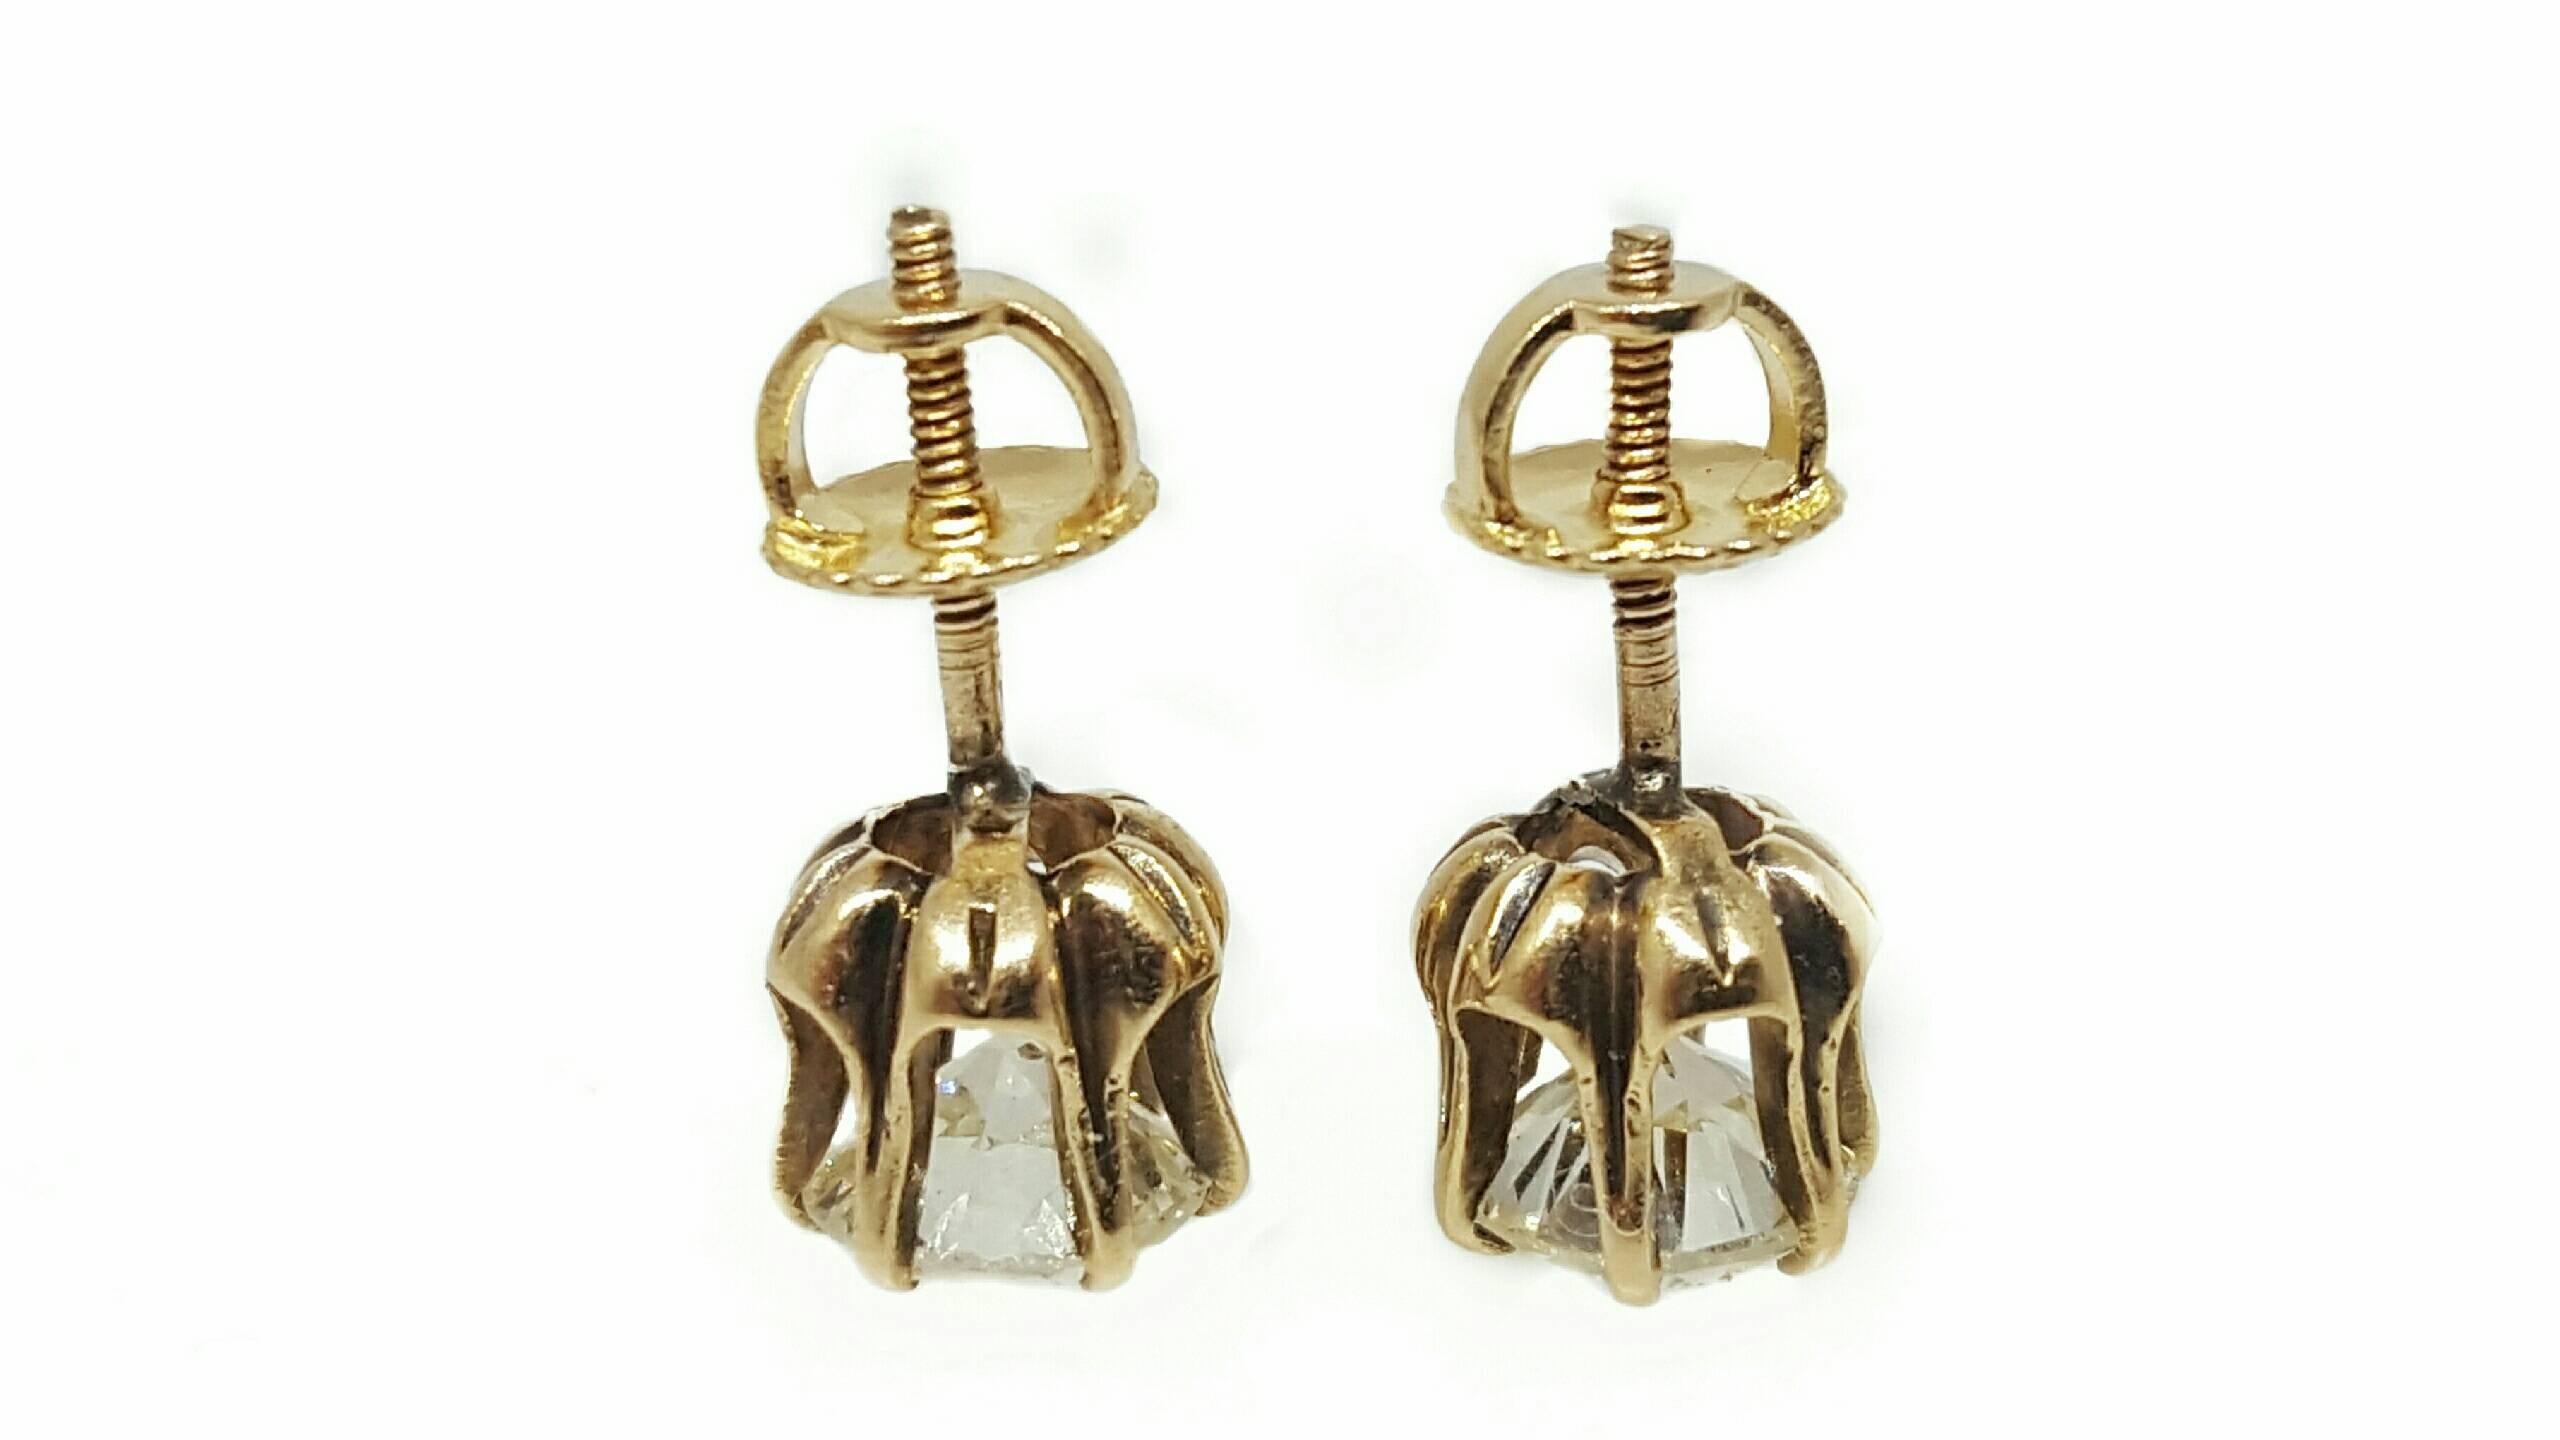 A pair of Old European cut diamonds in their original yellow gold mountings from the early 1900's. The earrings have six prongs each and screw-back posts. The diamonds are VS2 to SI1clarity with K to L color and an approximate weight of 1.55cttw.